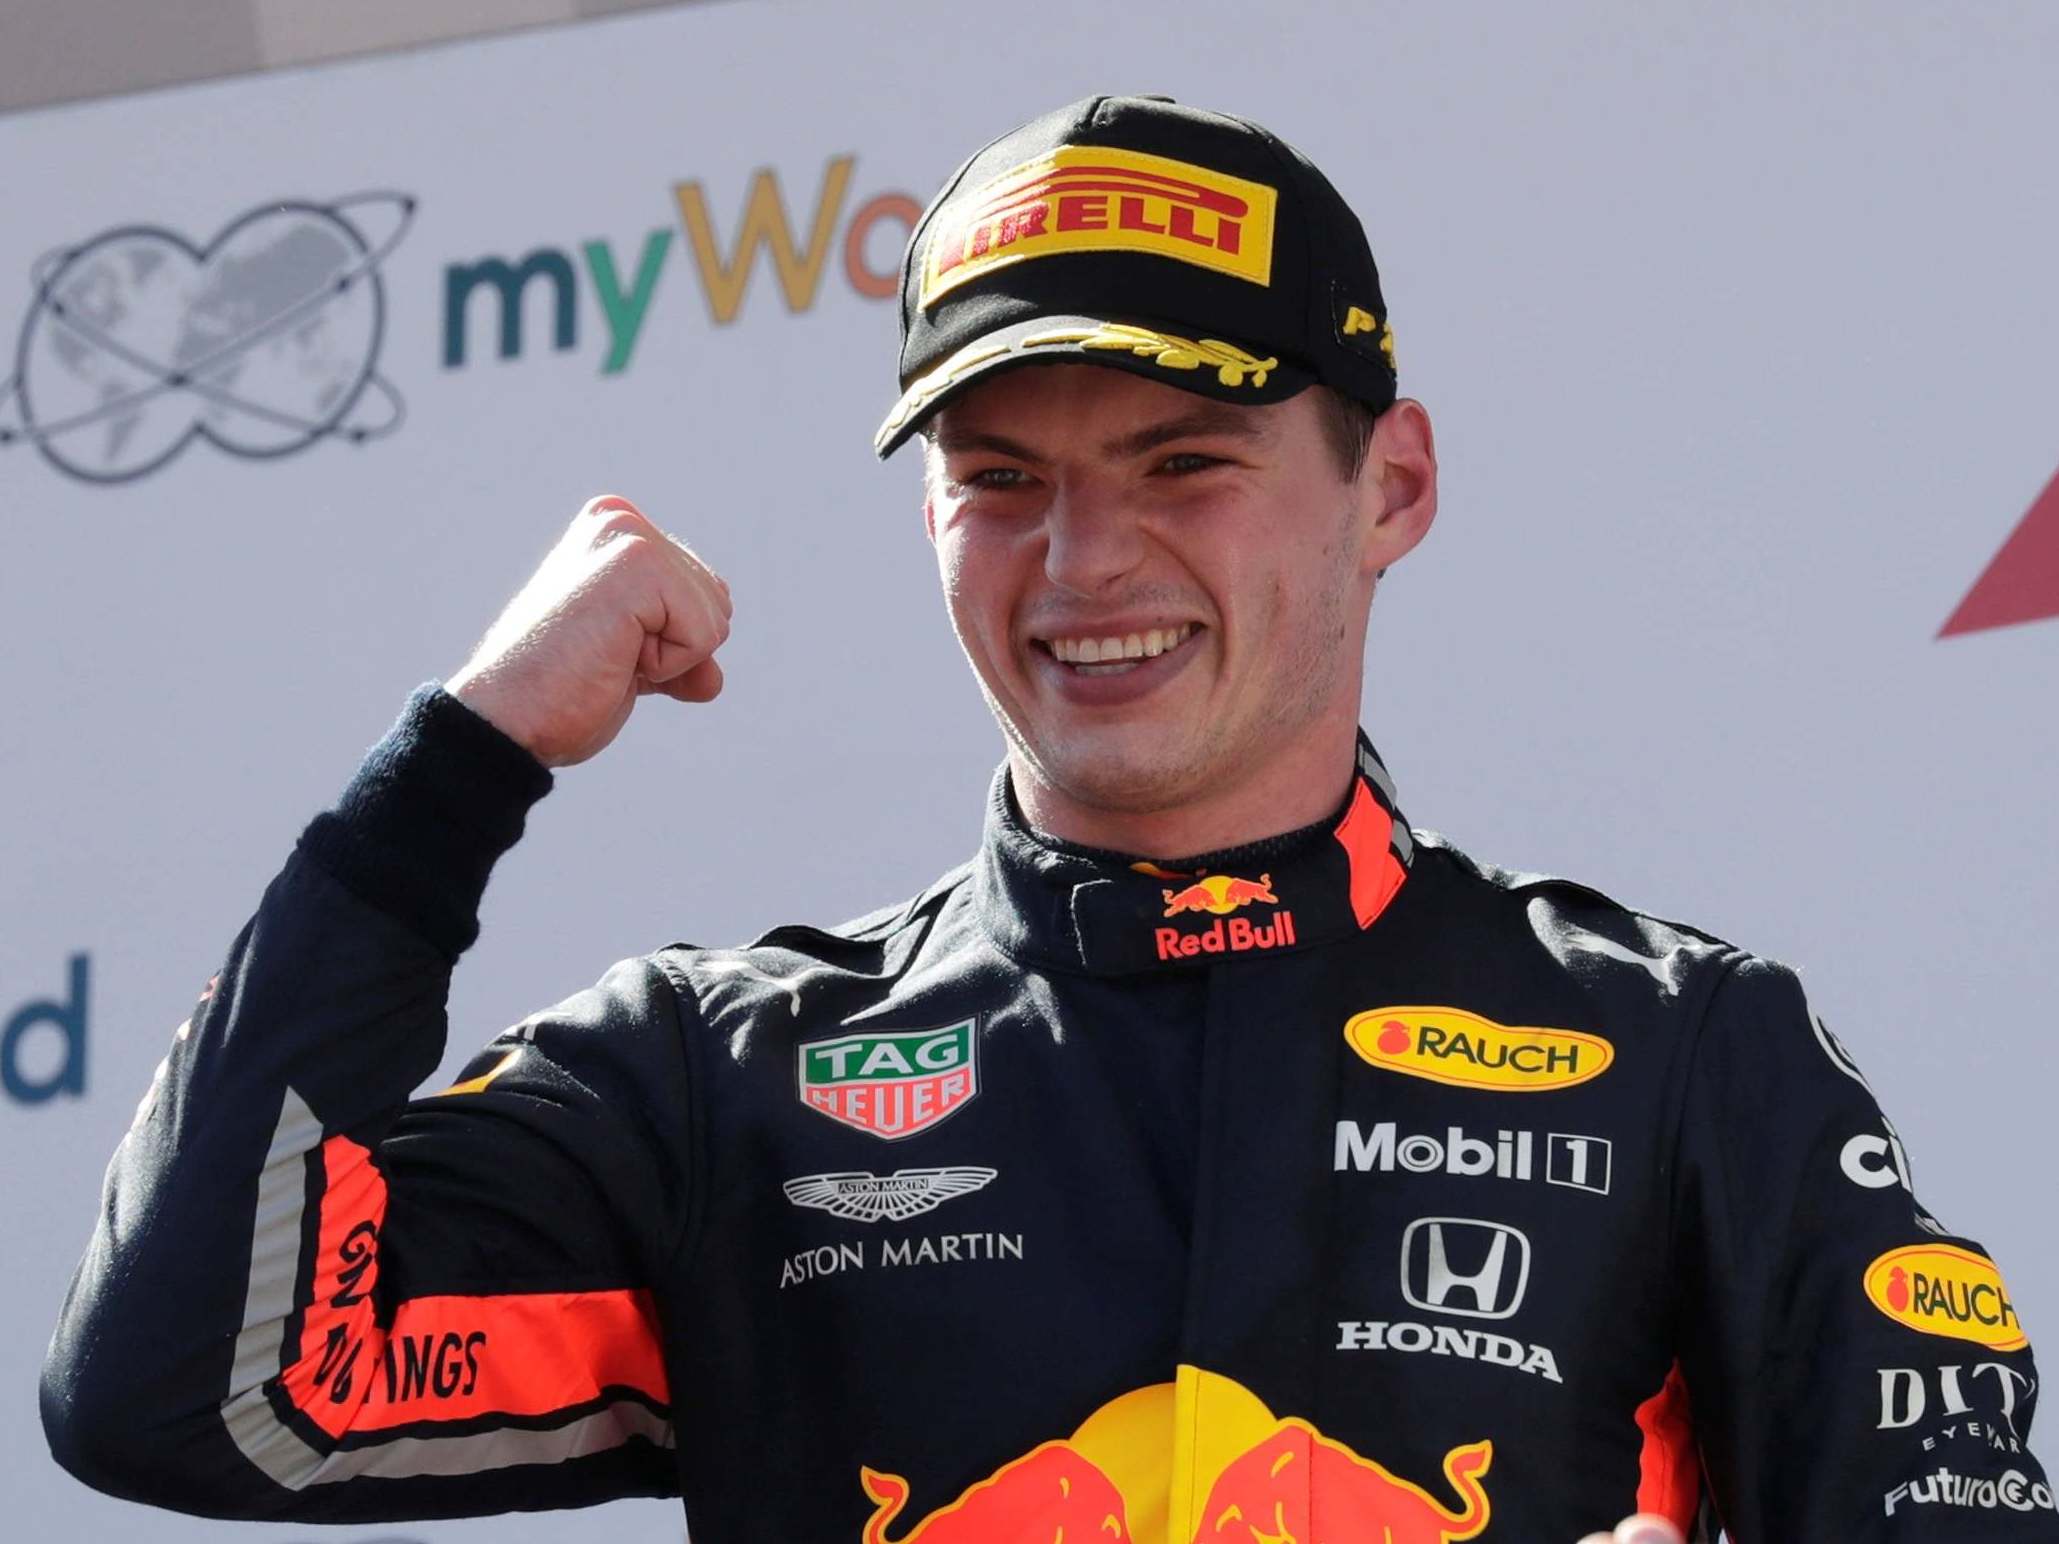 Verstappen celebrated the win but an investigation is ongoing